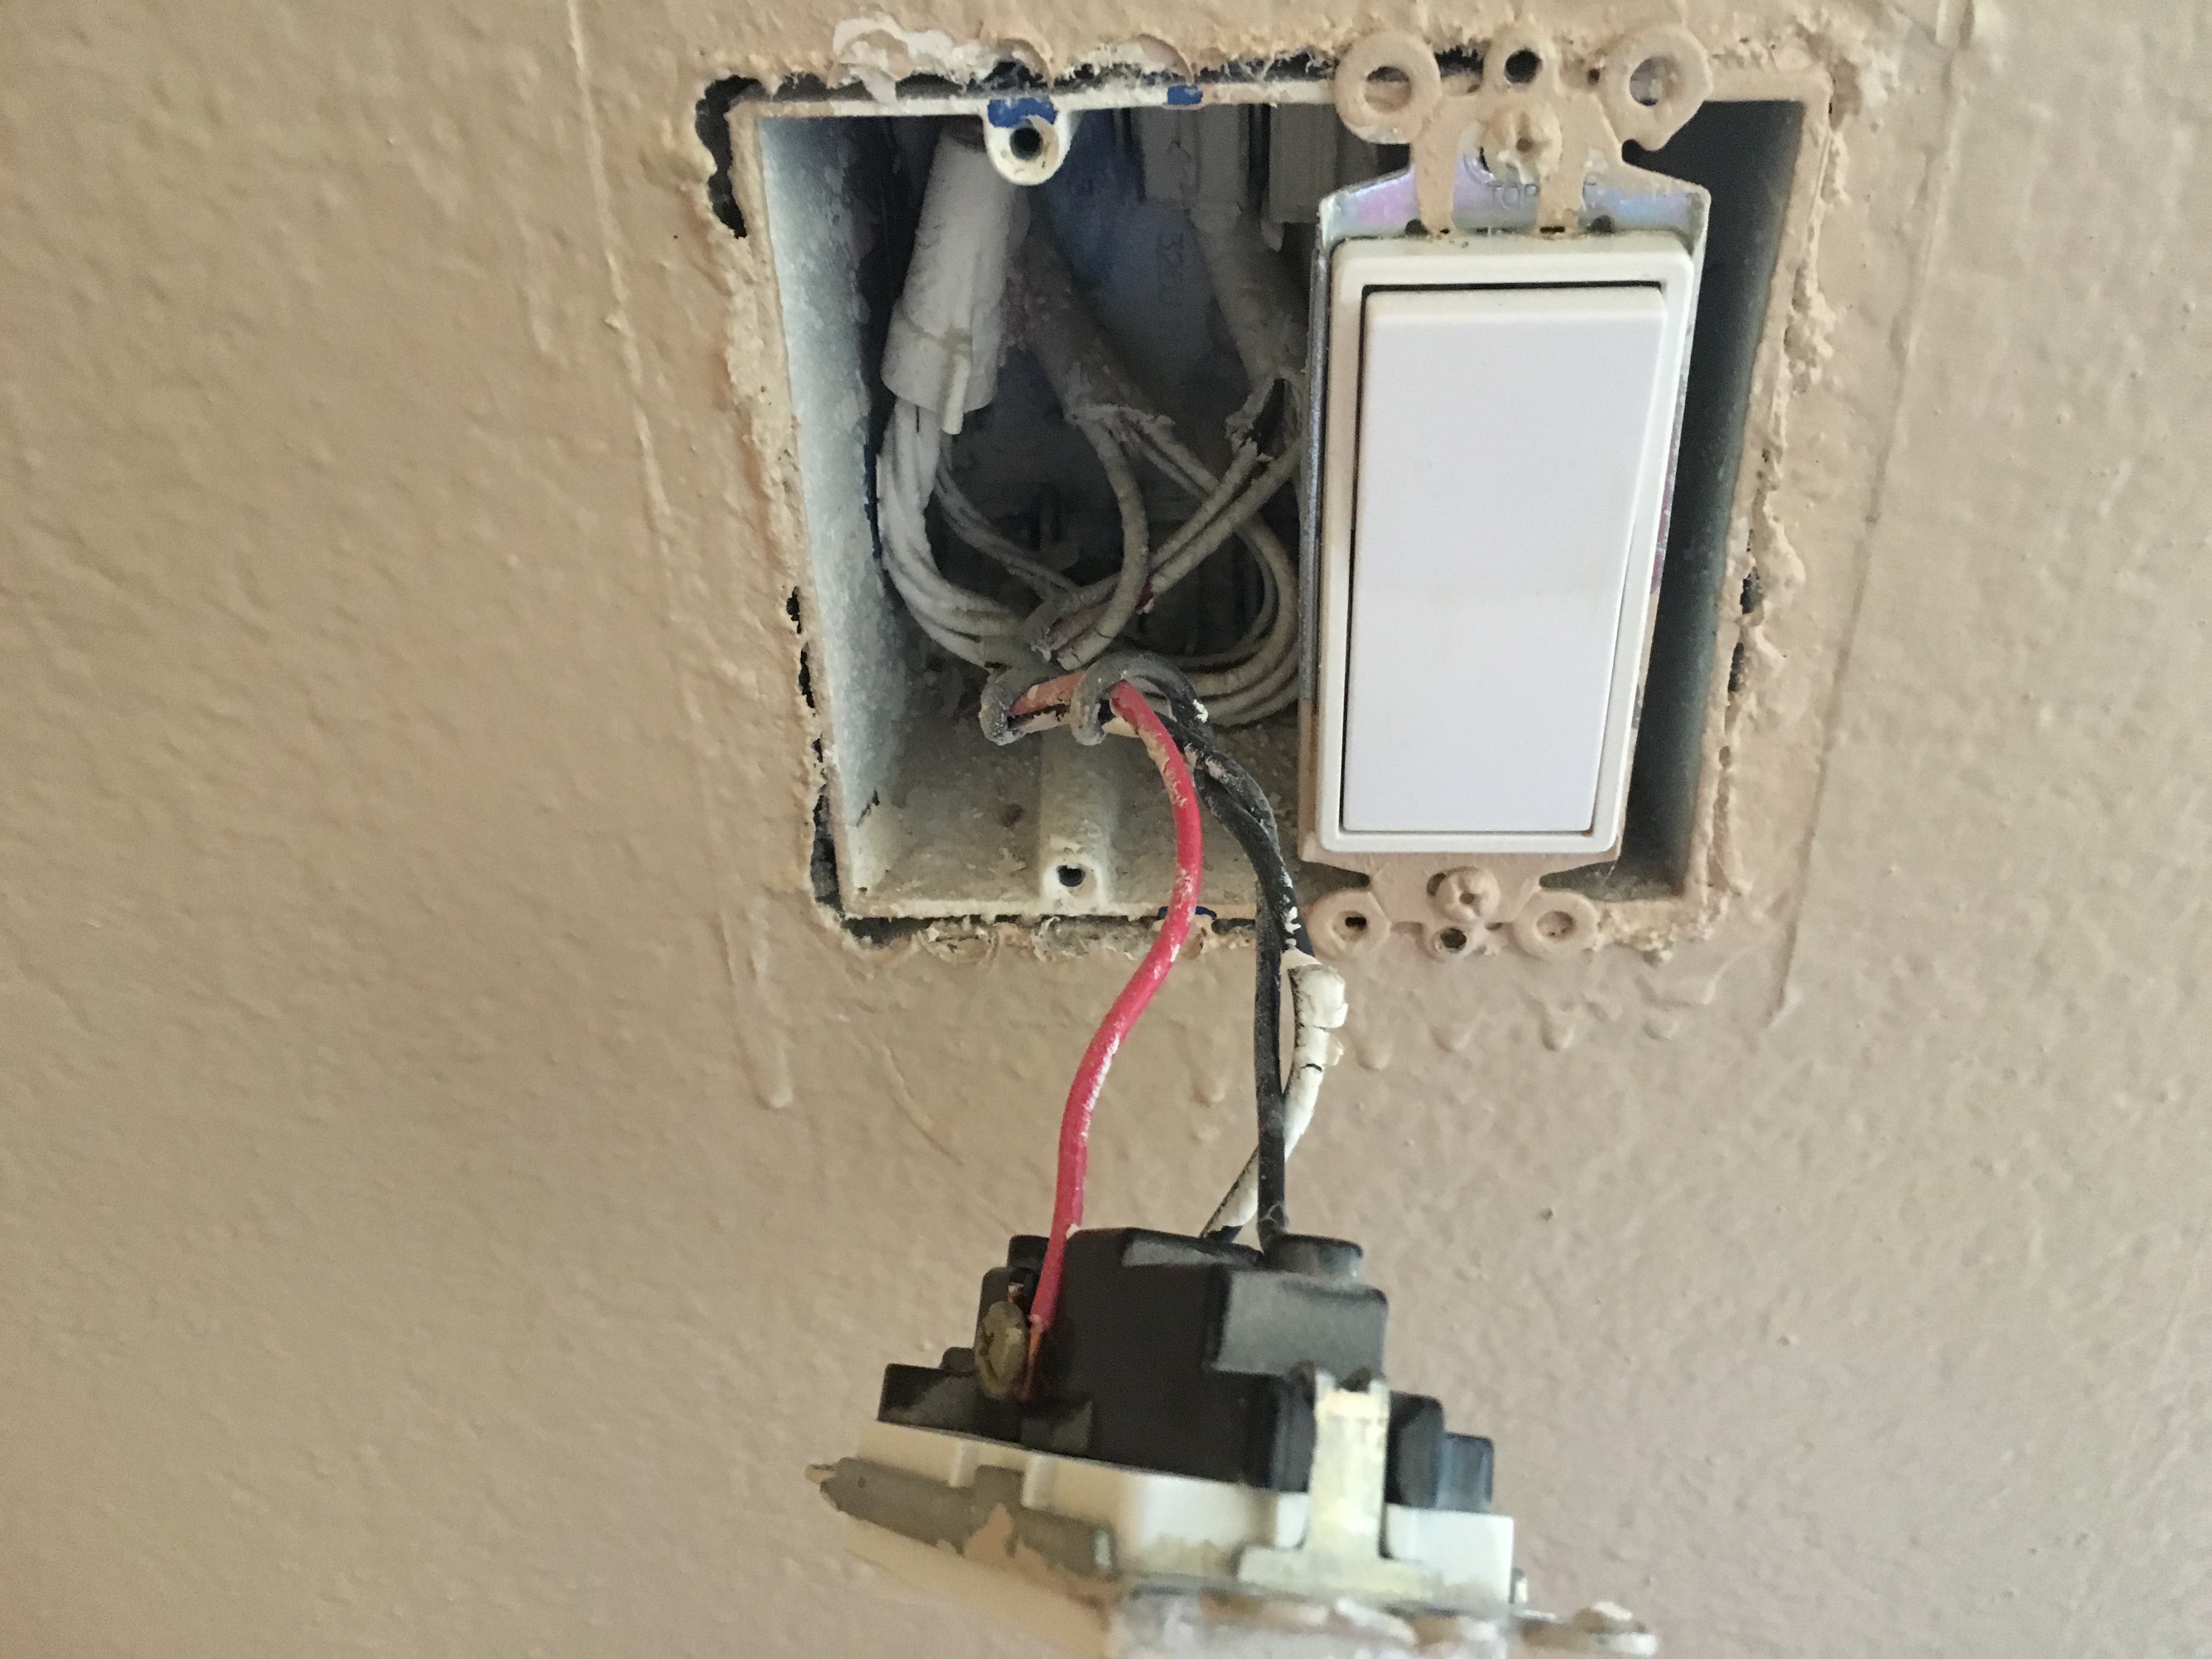 Permalink to Wiring A Ceiling Fan With Separate Switches For Light And Fan